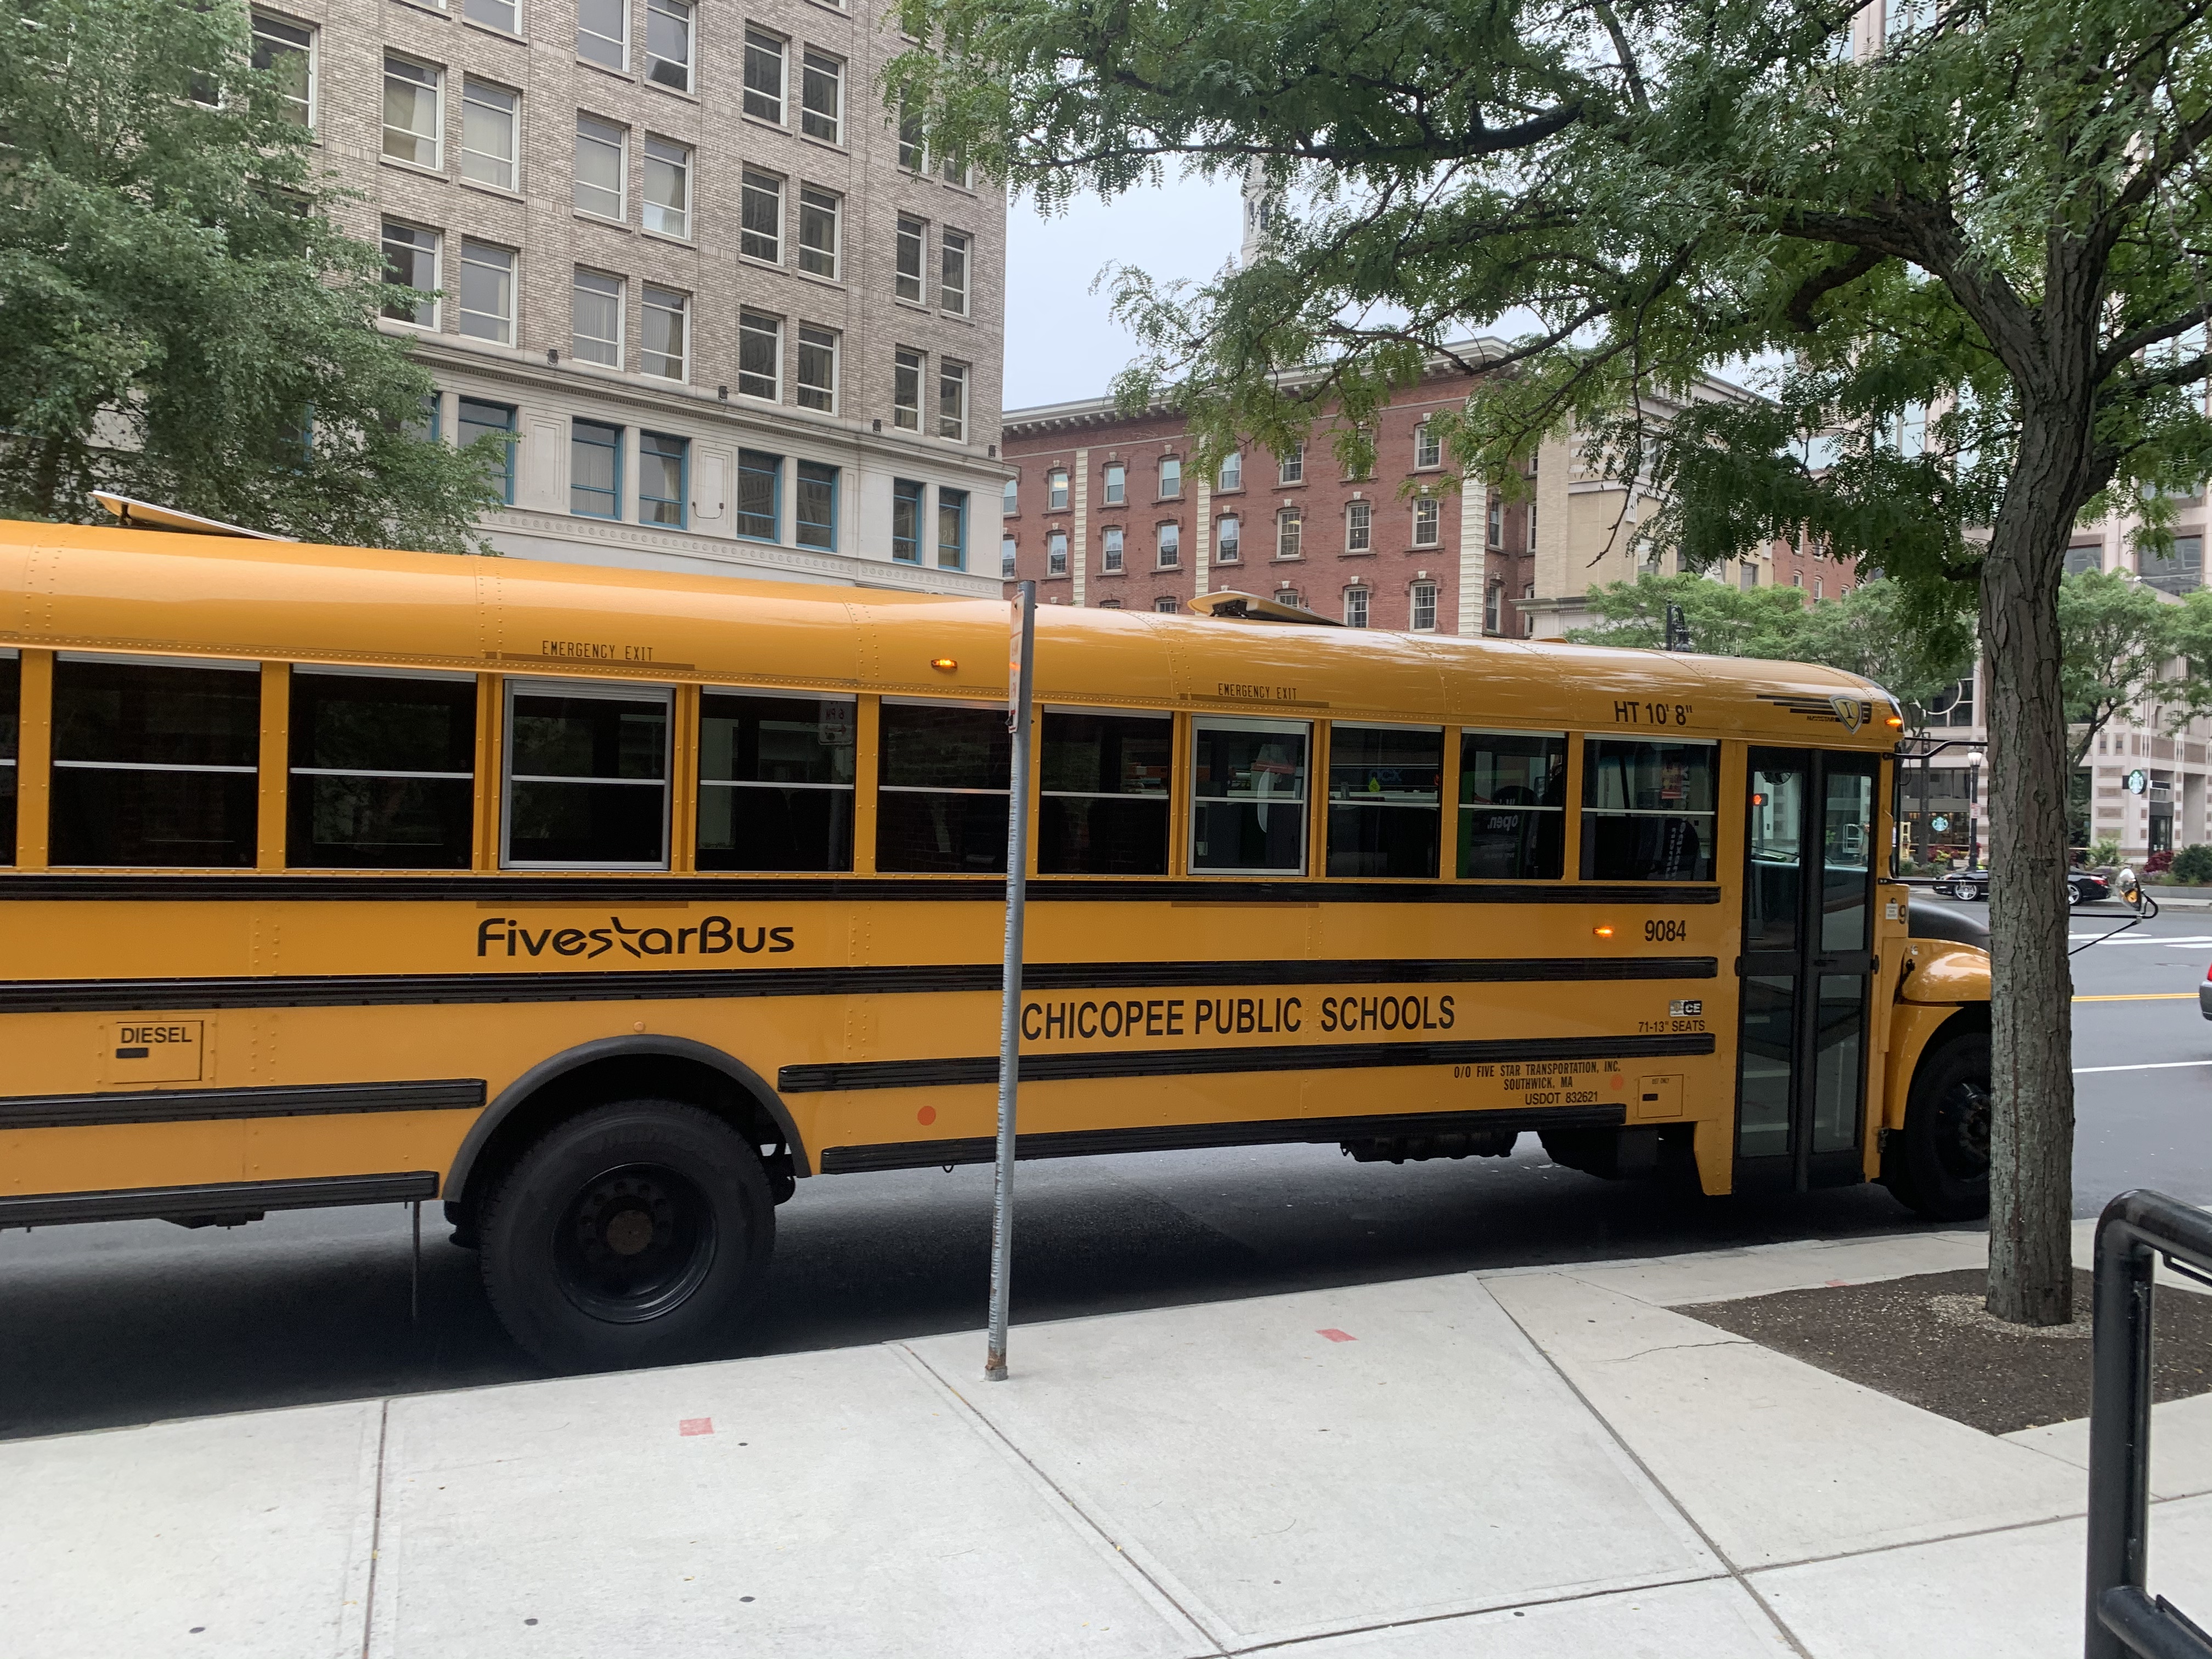 A school bus parked on a street